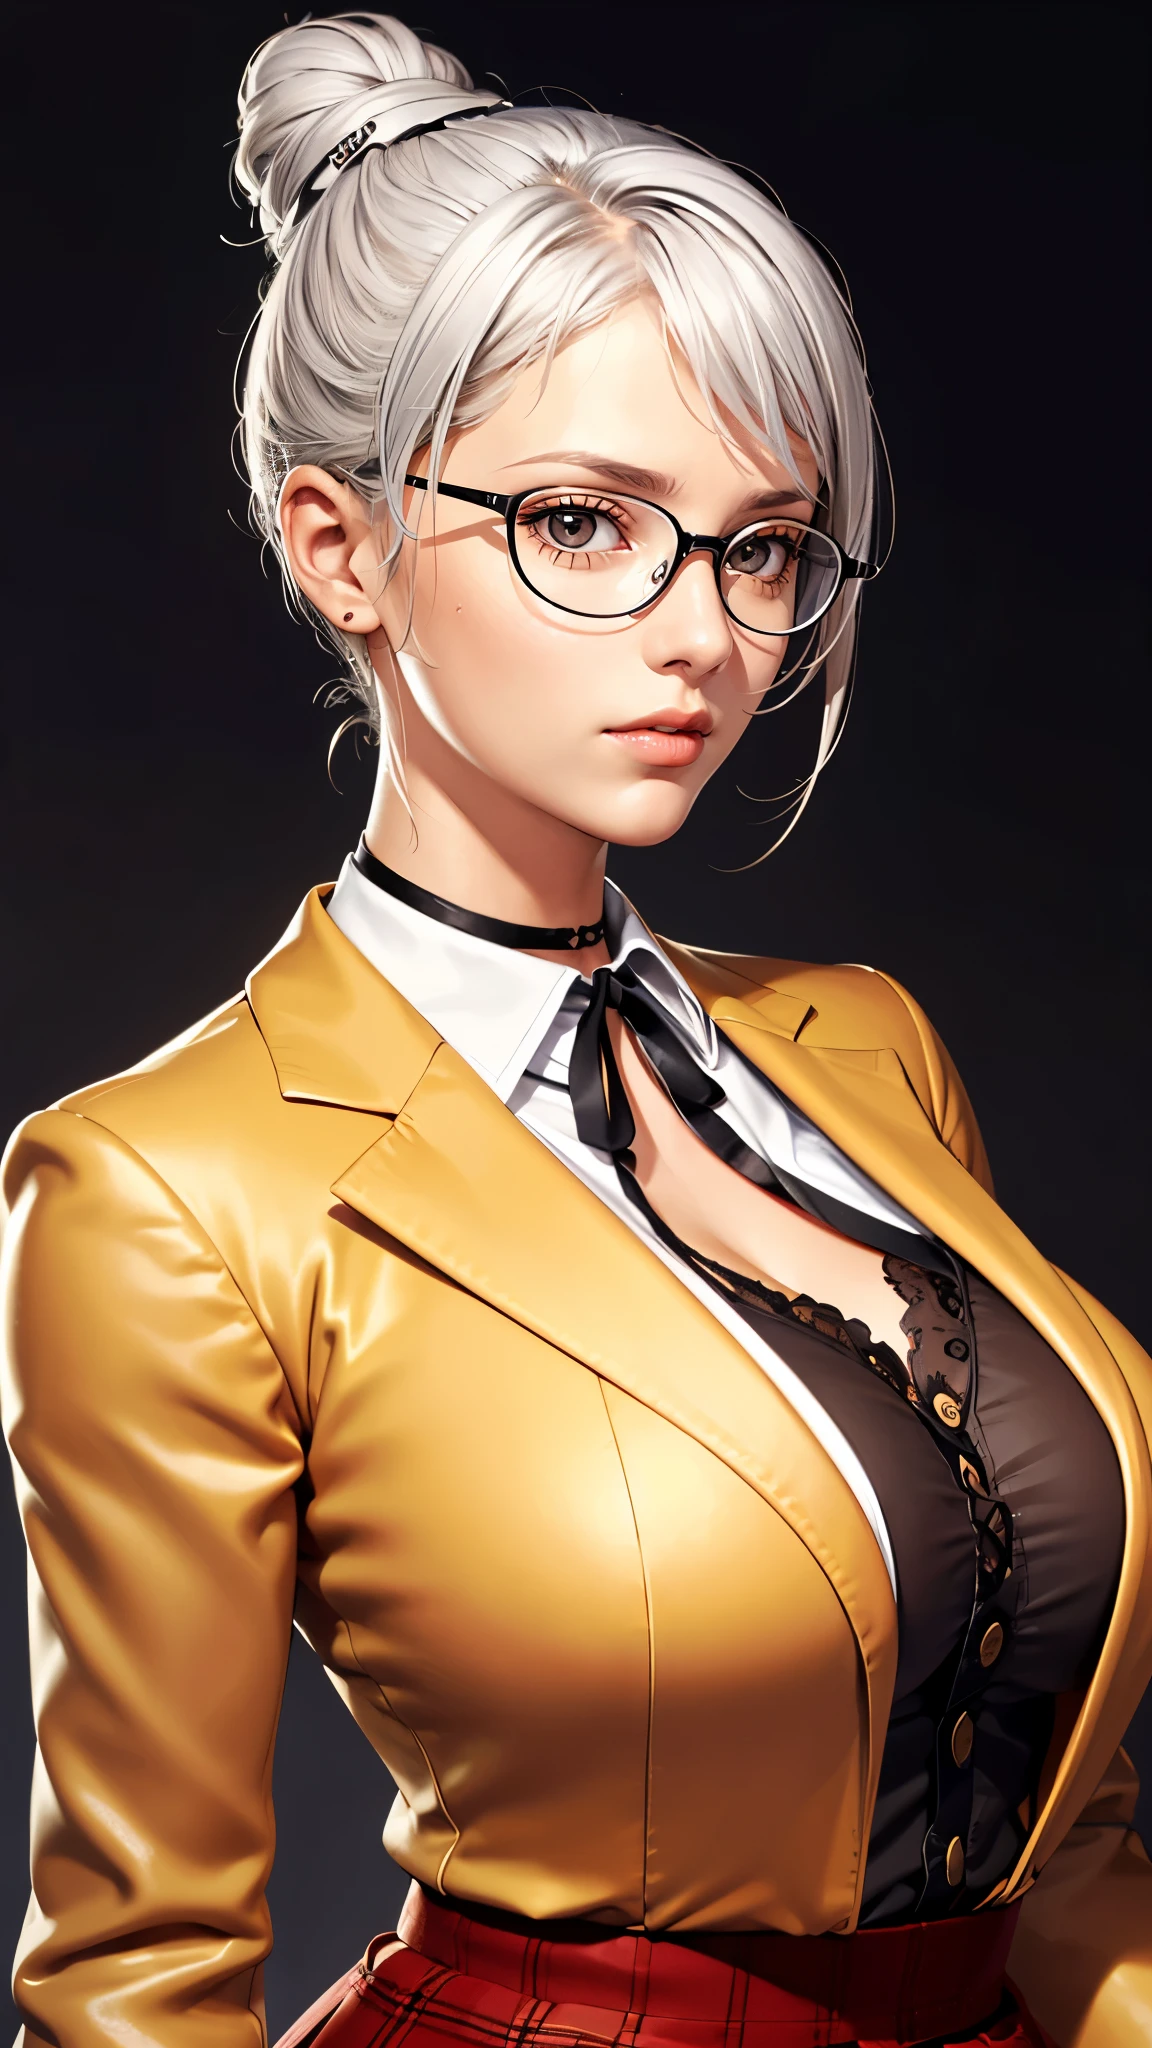 （（（Perfect figure，figure，,  plaid skirt,  ribbon choker, brown jacket，White shirt，（（（shiraki meiko，hair bun, glasses，White hair，）））型figure:1.7））），((masterpiece)),high resolution, ((Best quality at best))，masterpiece，quality，Best quality，（（（ Exquisite facial features，looking at the audience,There is light in the eyes，Happy，nterlacing of light and shadow，huge boobs））），（（（looking into camera，）））